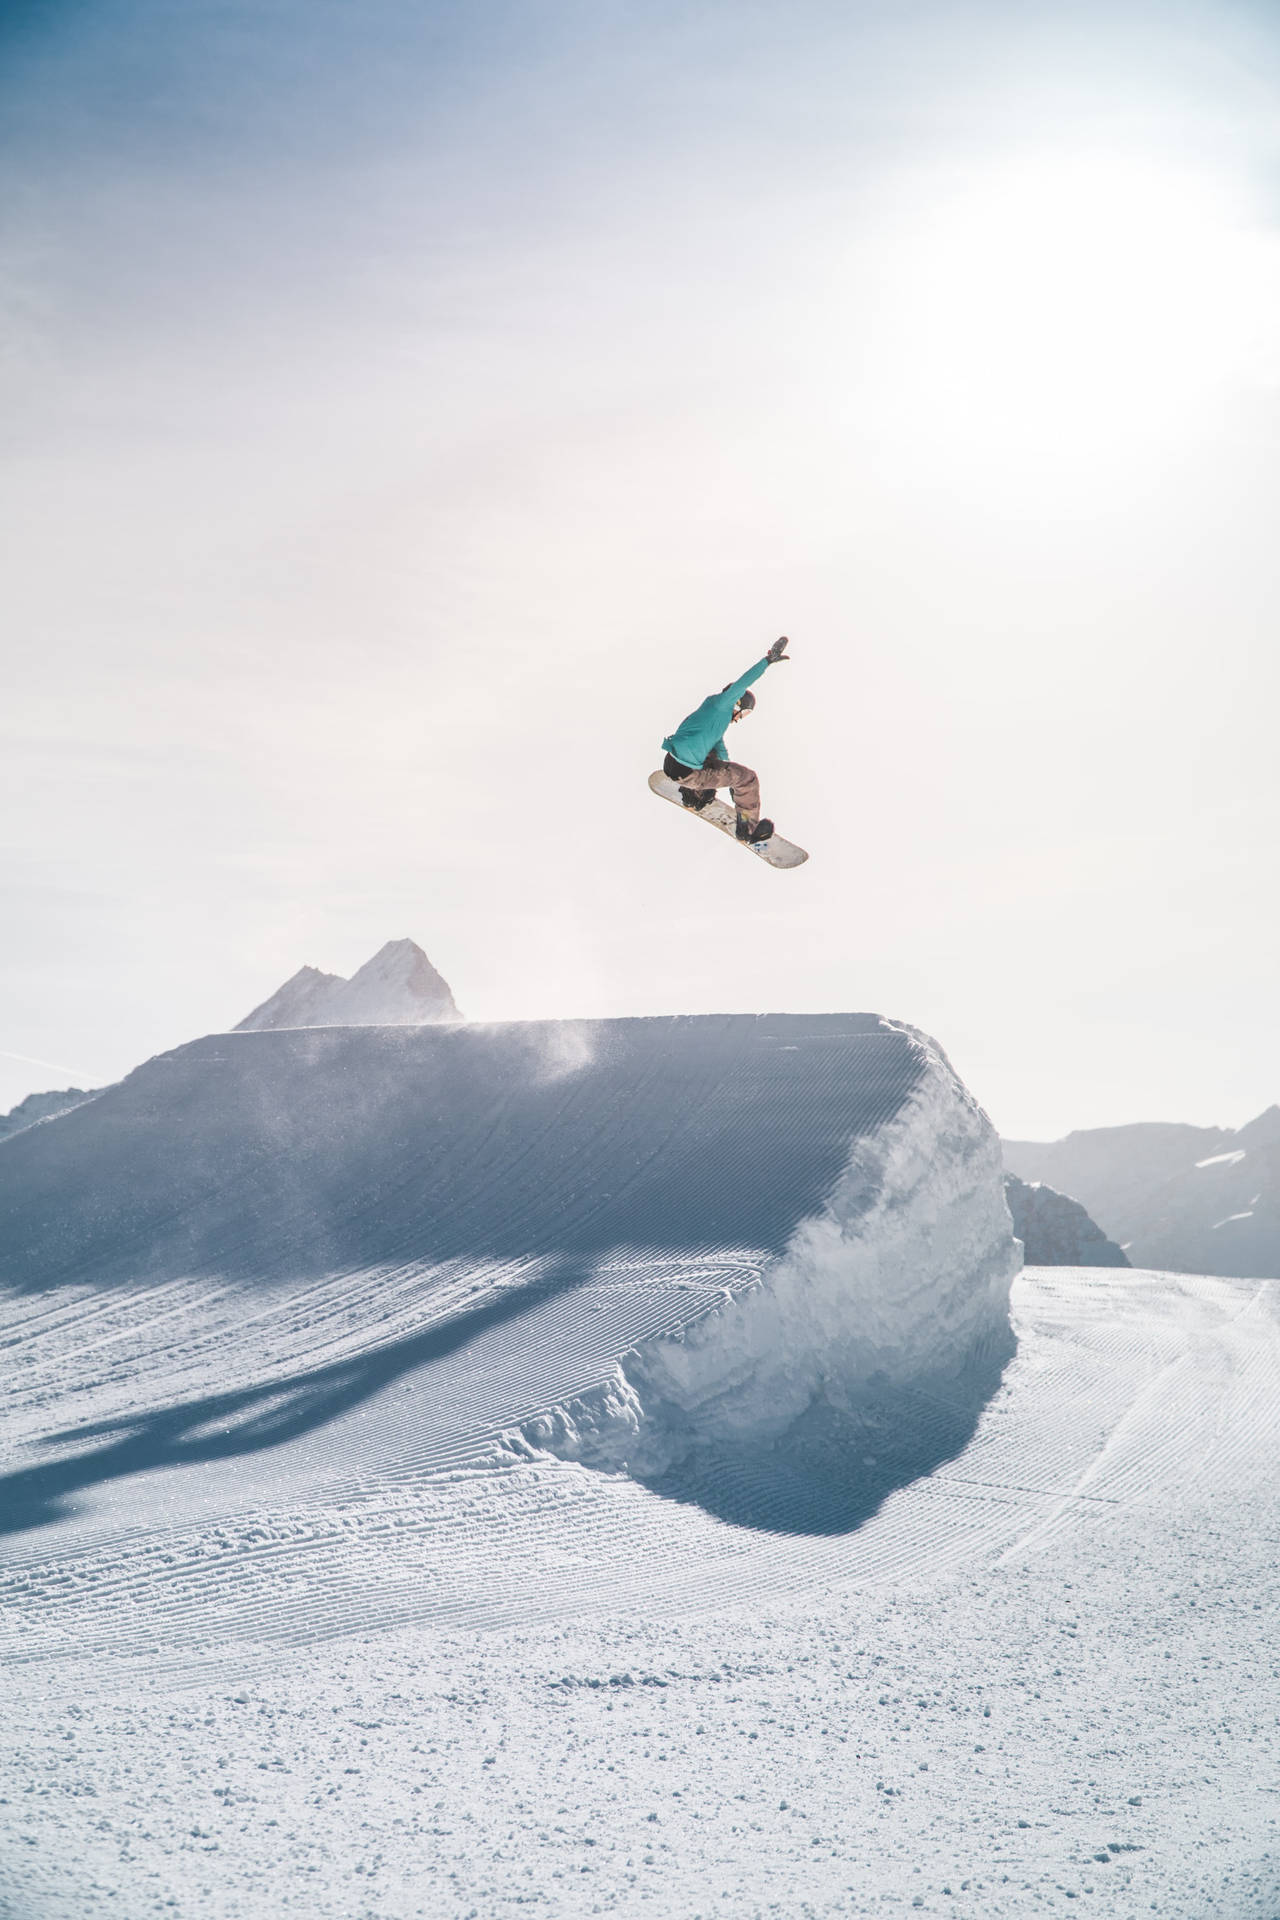 Sport Snowboarding In Snow-covered Mountain Background